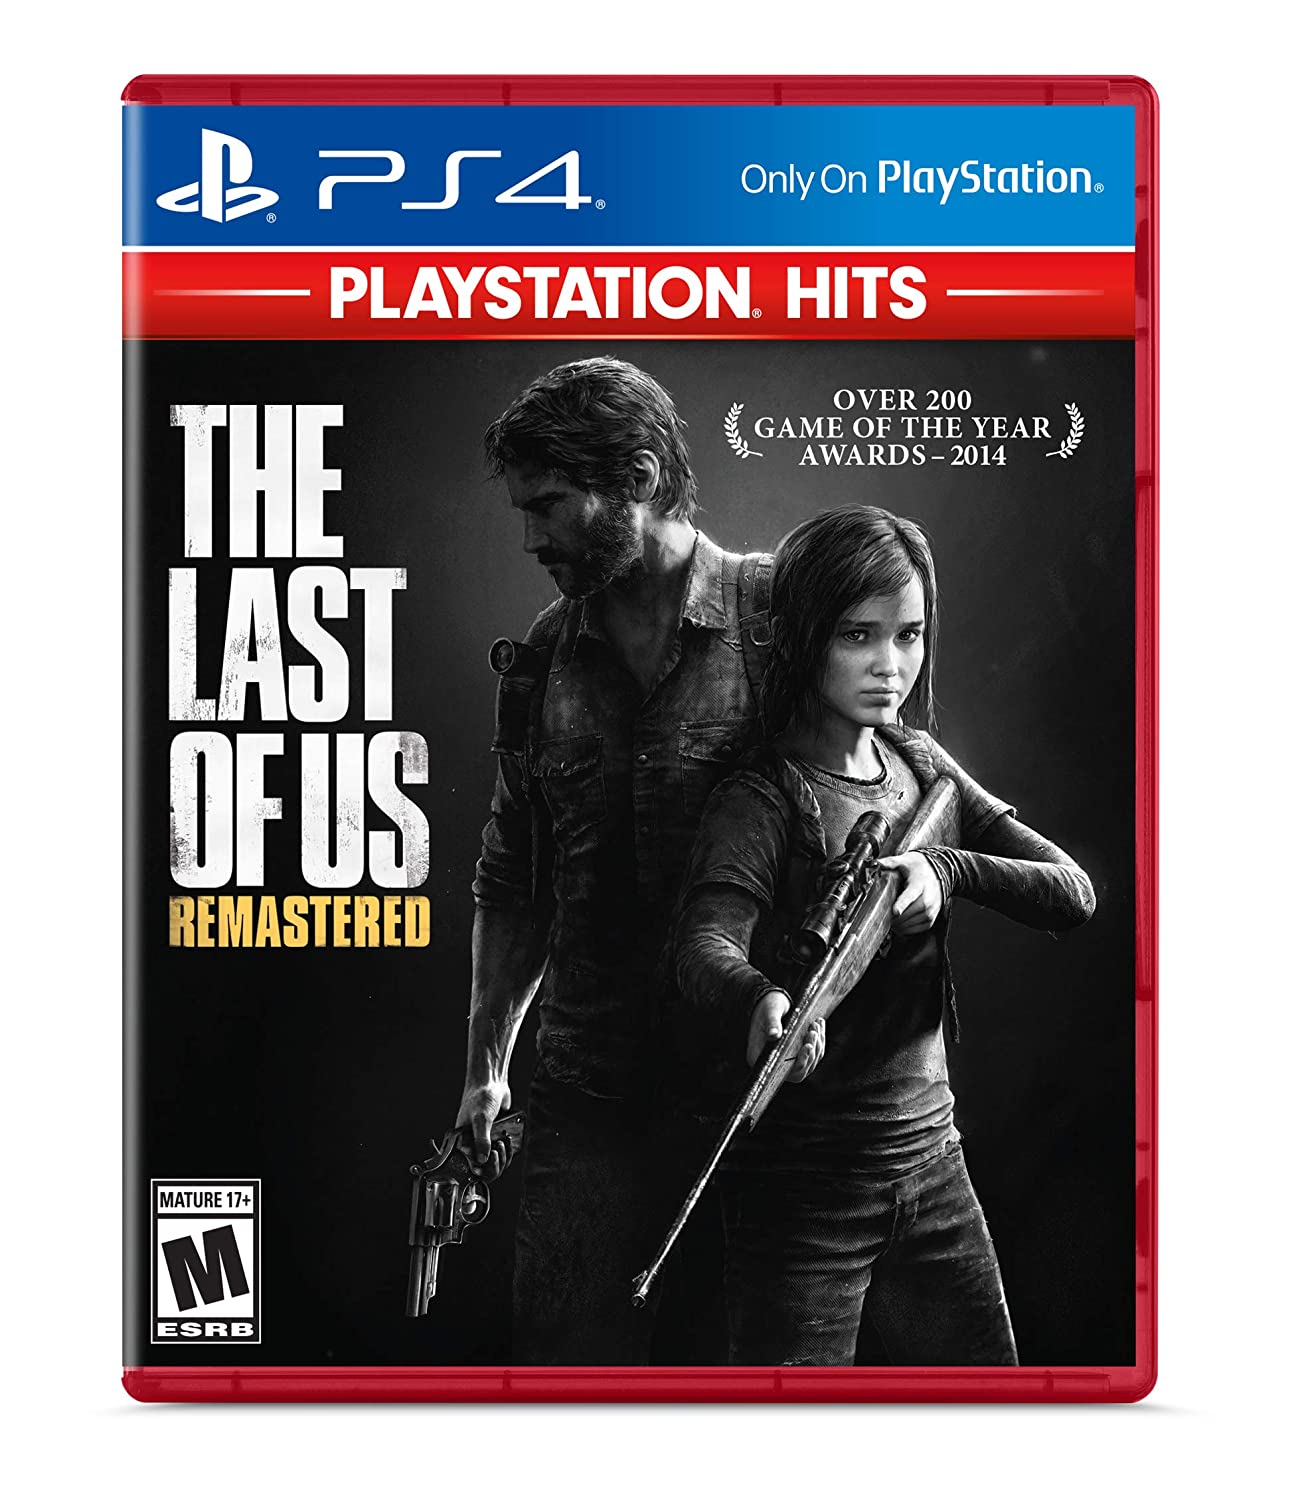 The Last of Us Remastered (Playstation Hits) (Playstation 4)